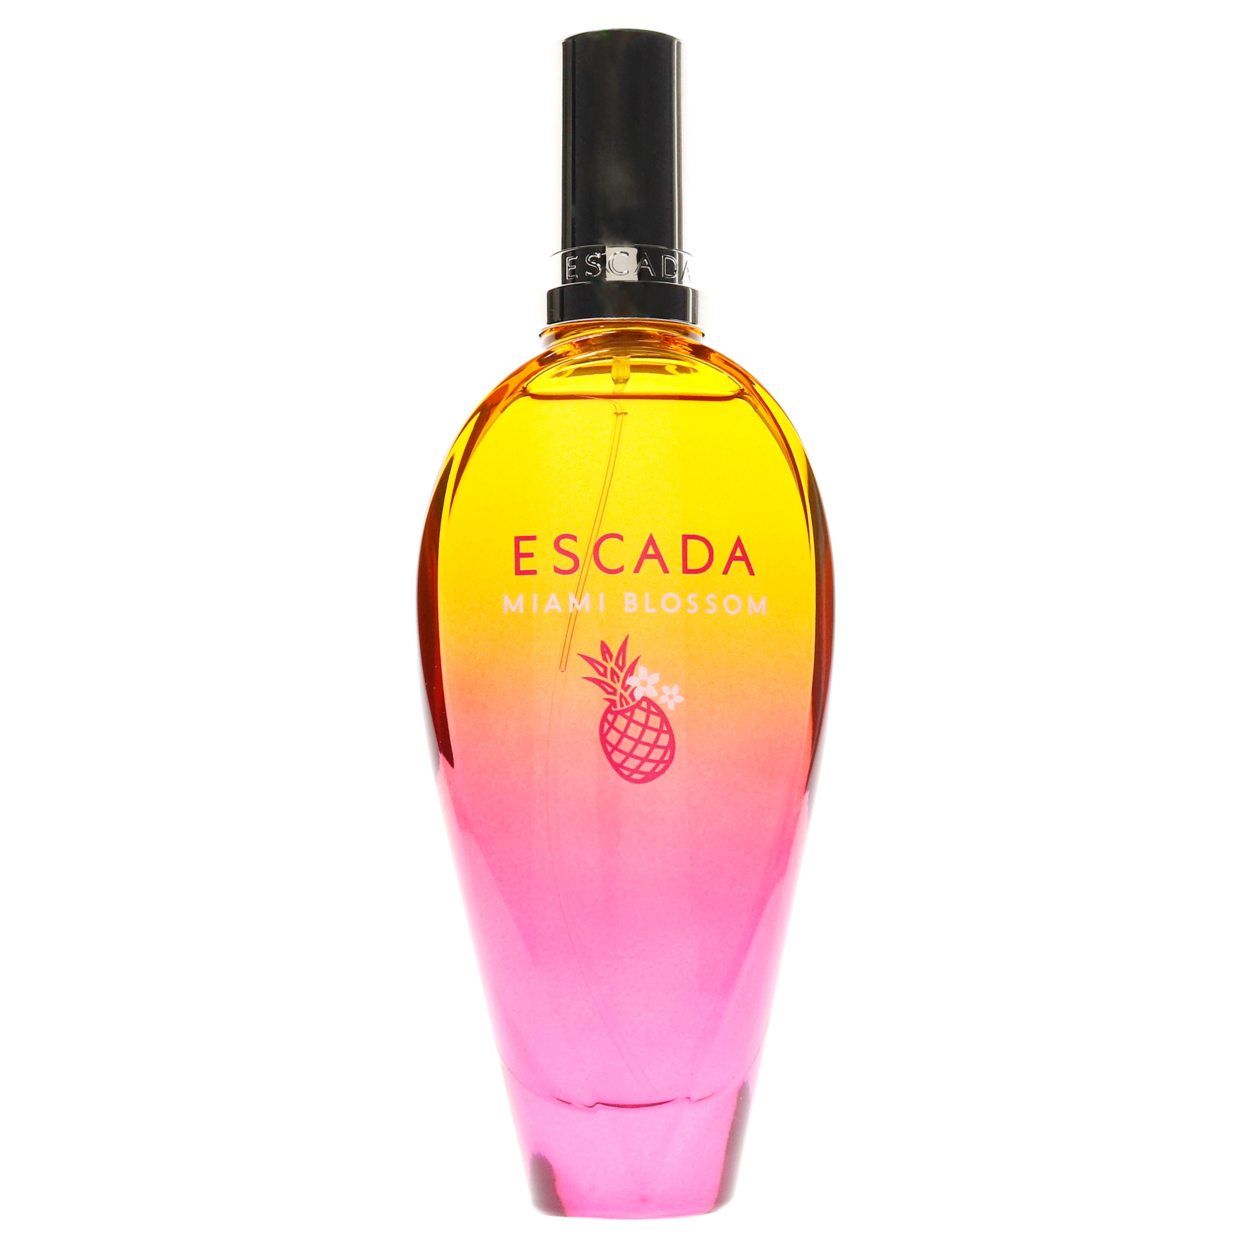 Miami Blossom by Escada for Women - 3.3 oz EDT Spray (Limited Edition) - image 2 of 6